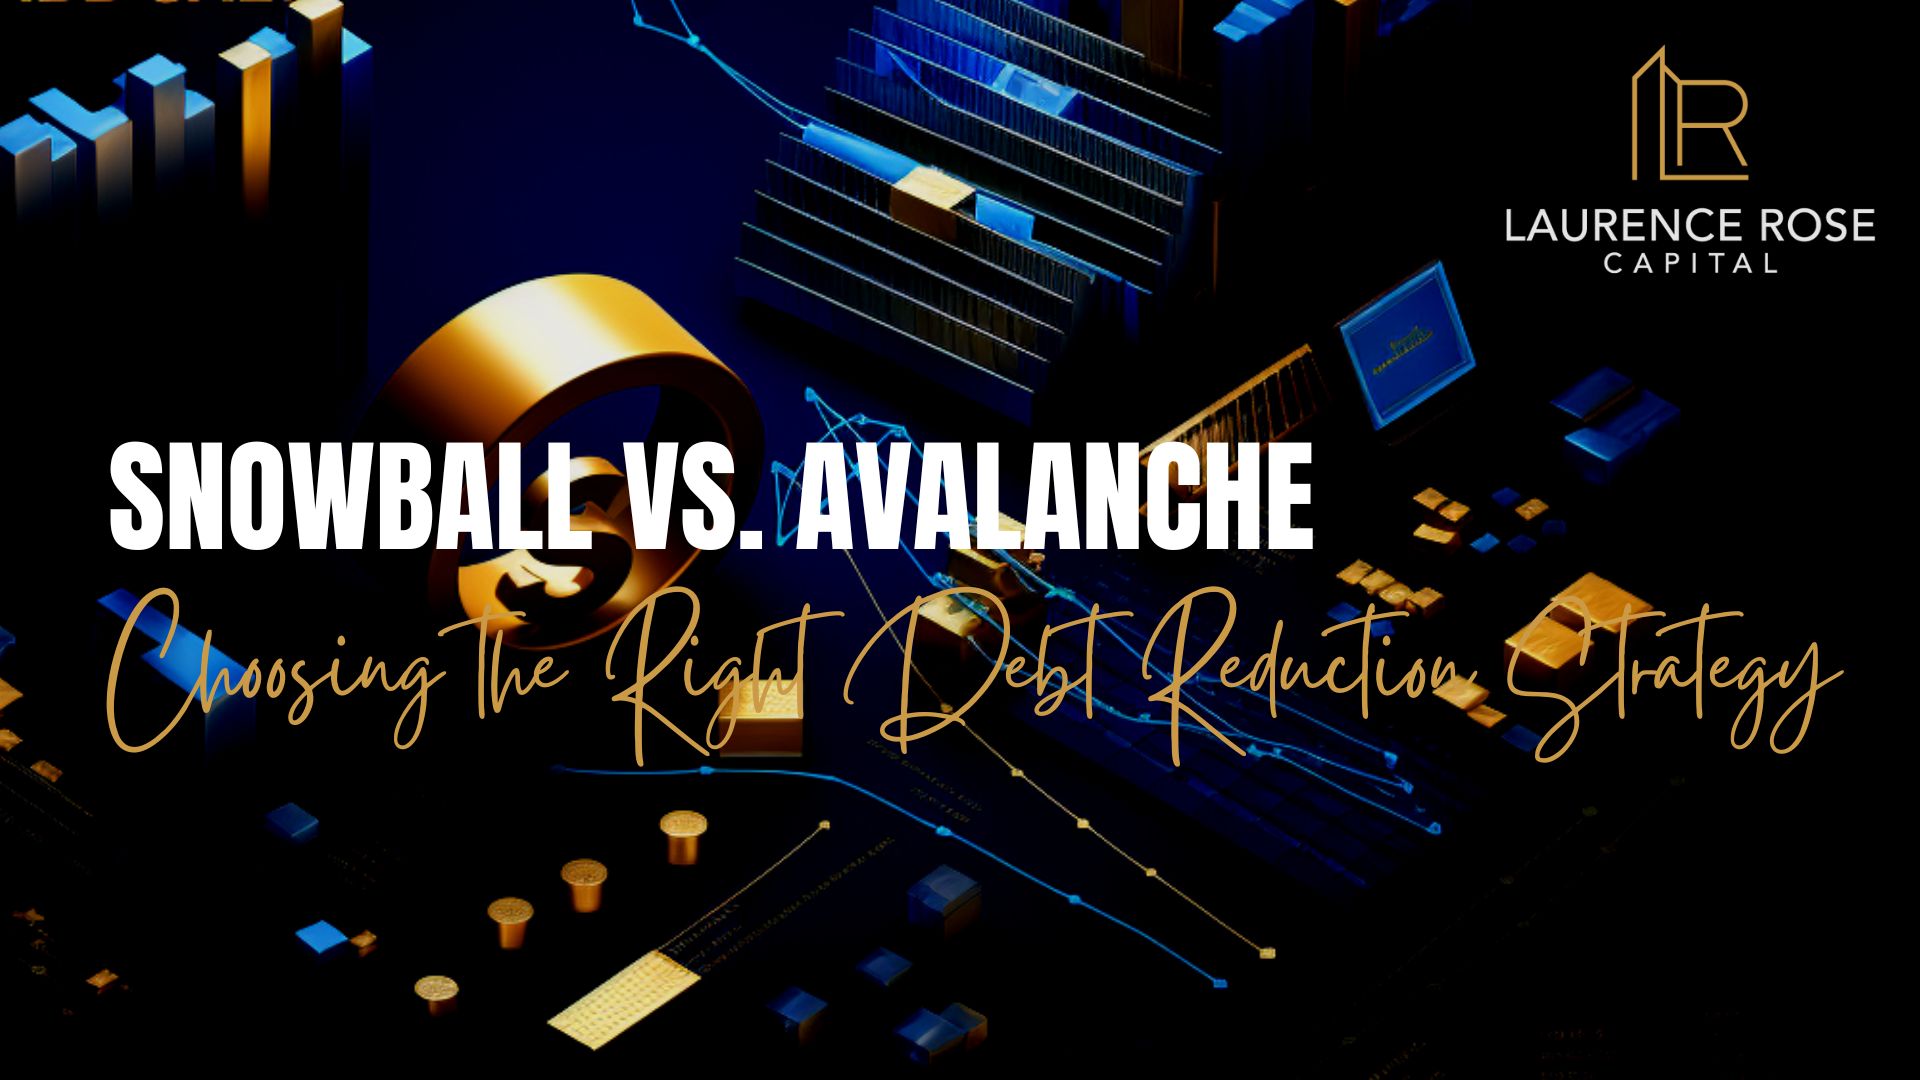 Snowball vs. Avalanche: Choosing the Right Debt Reduction Strategy